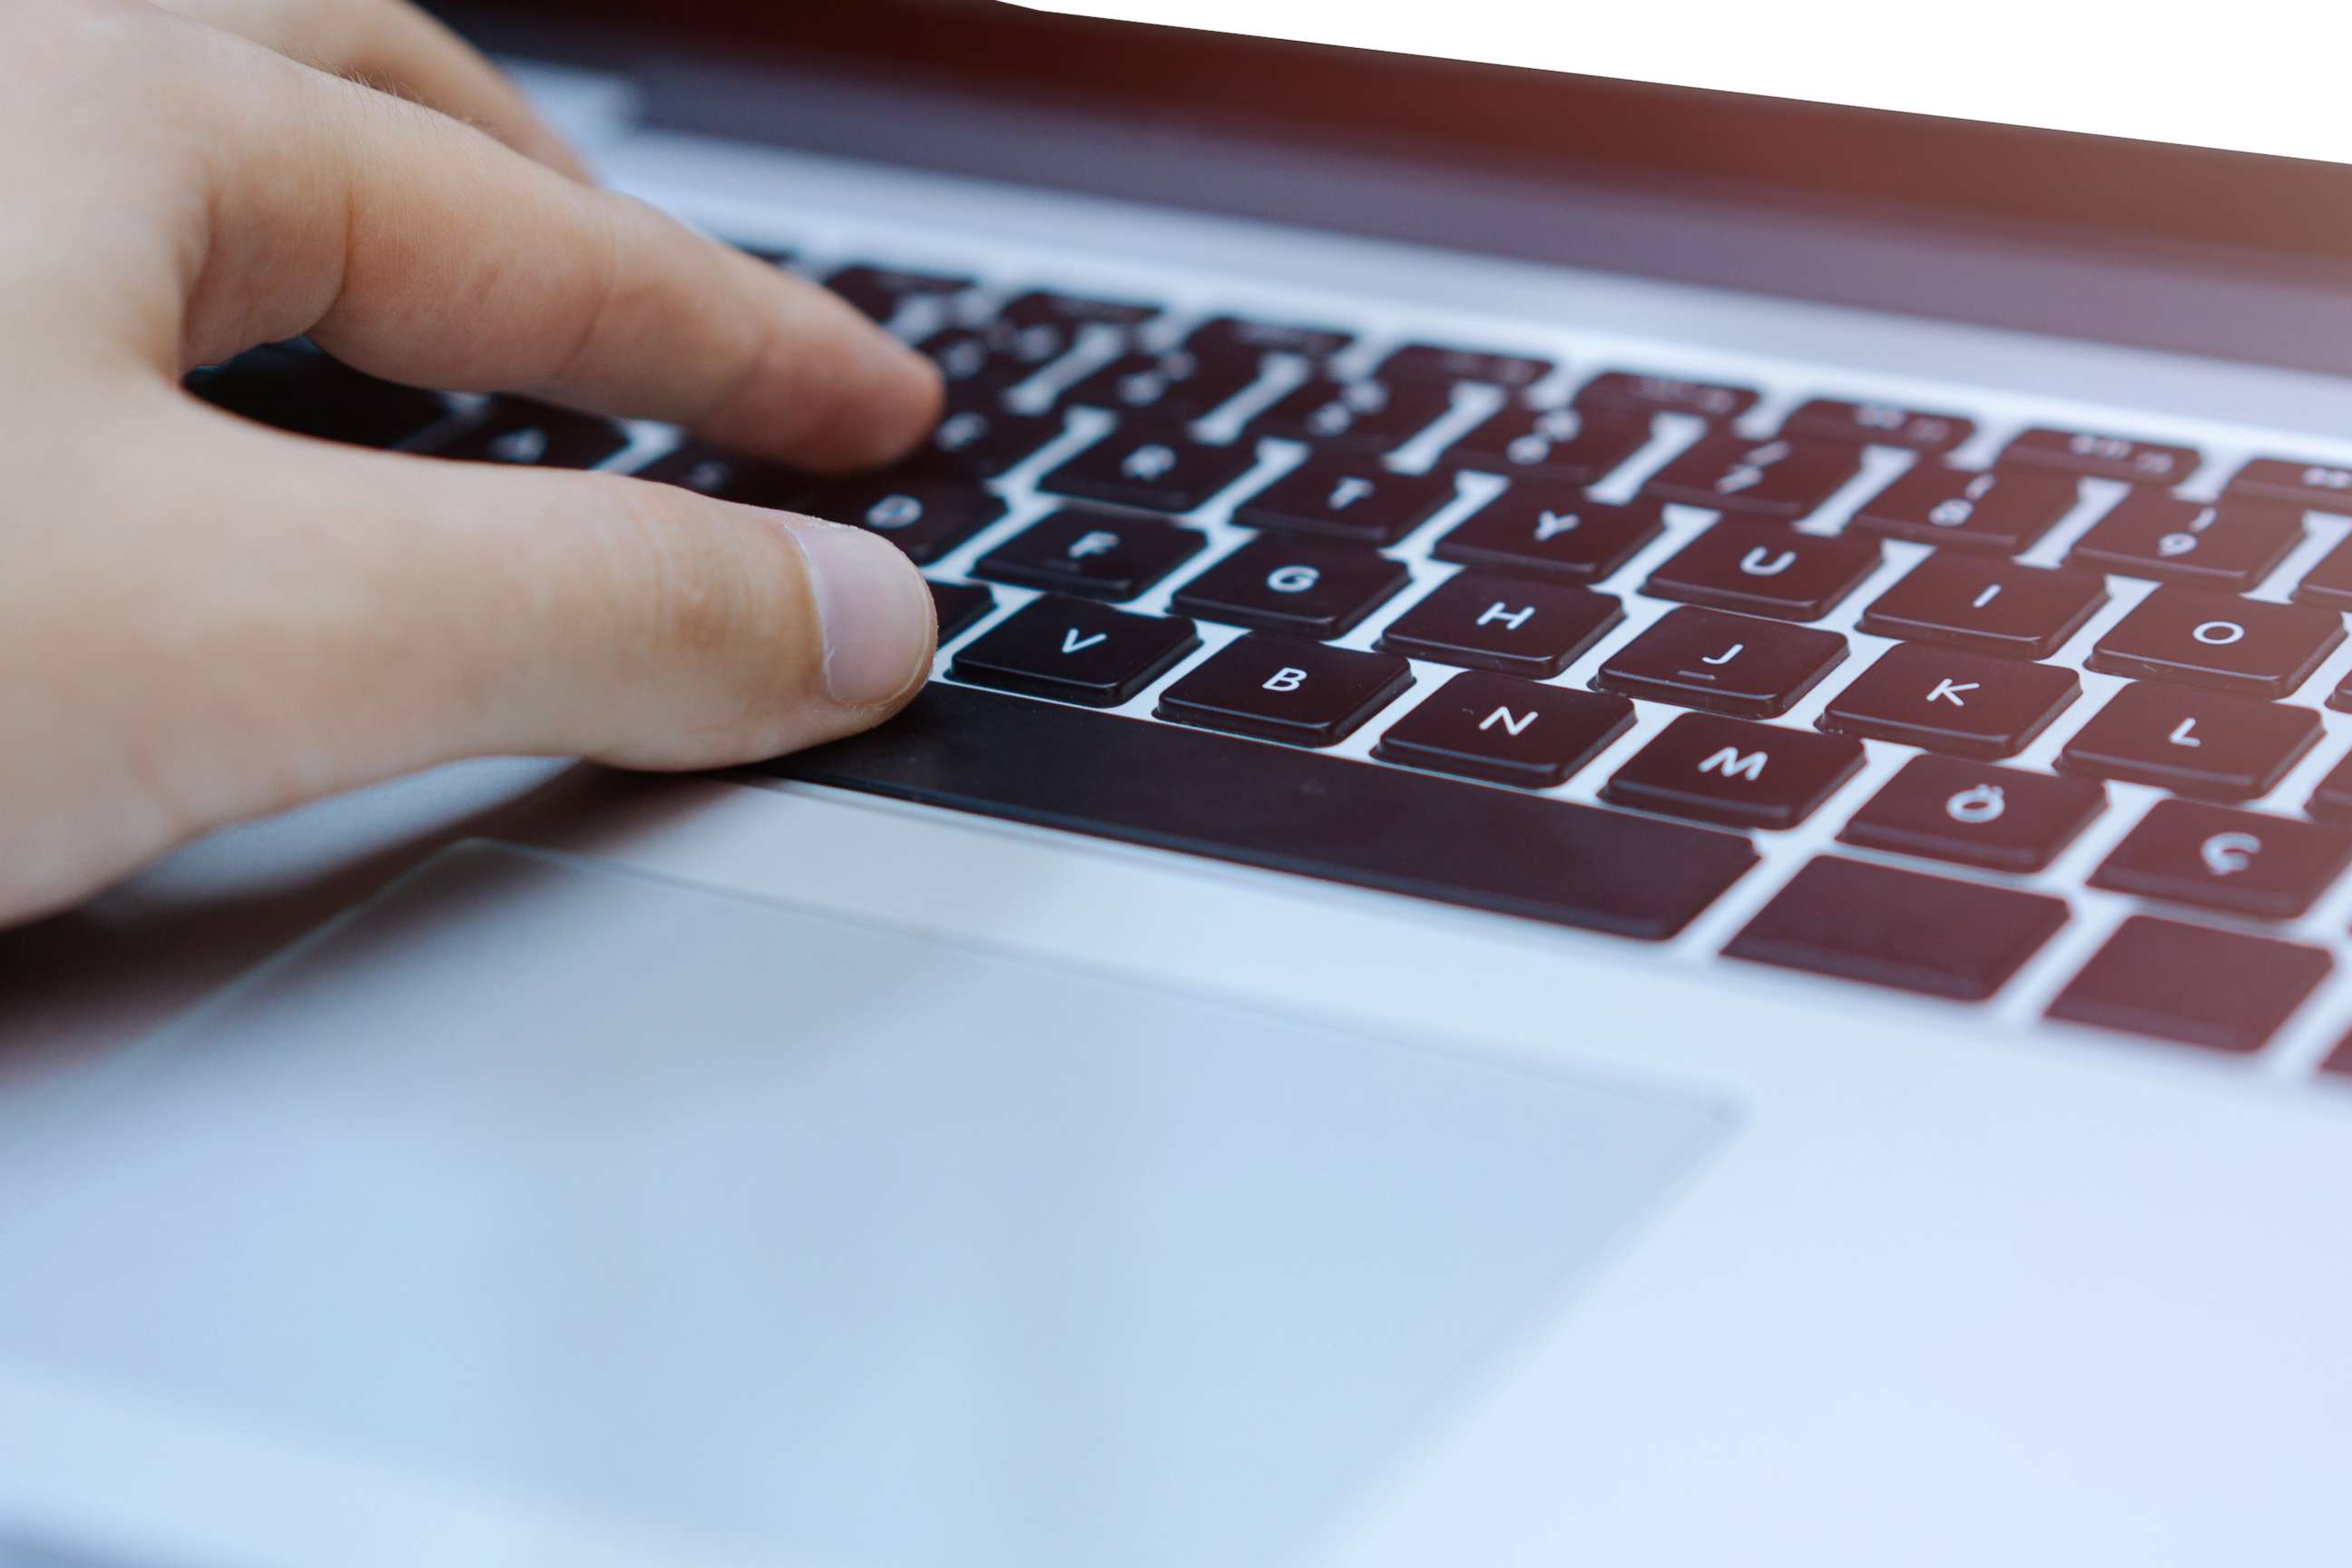 PHOTO: A man types on a laptop in this stock photo.